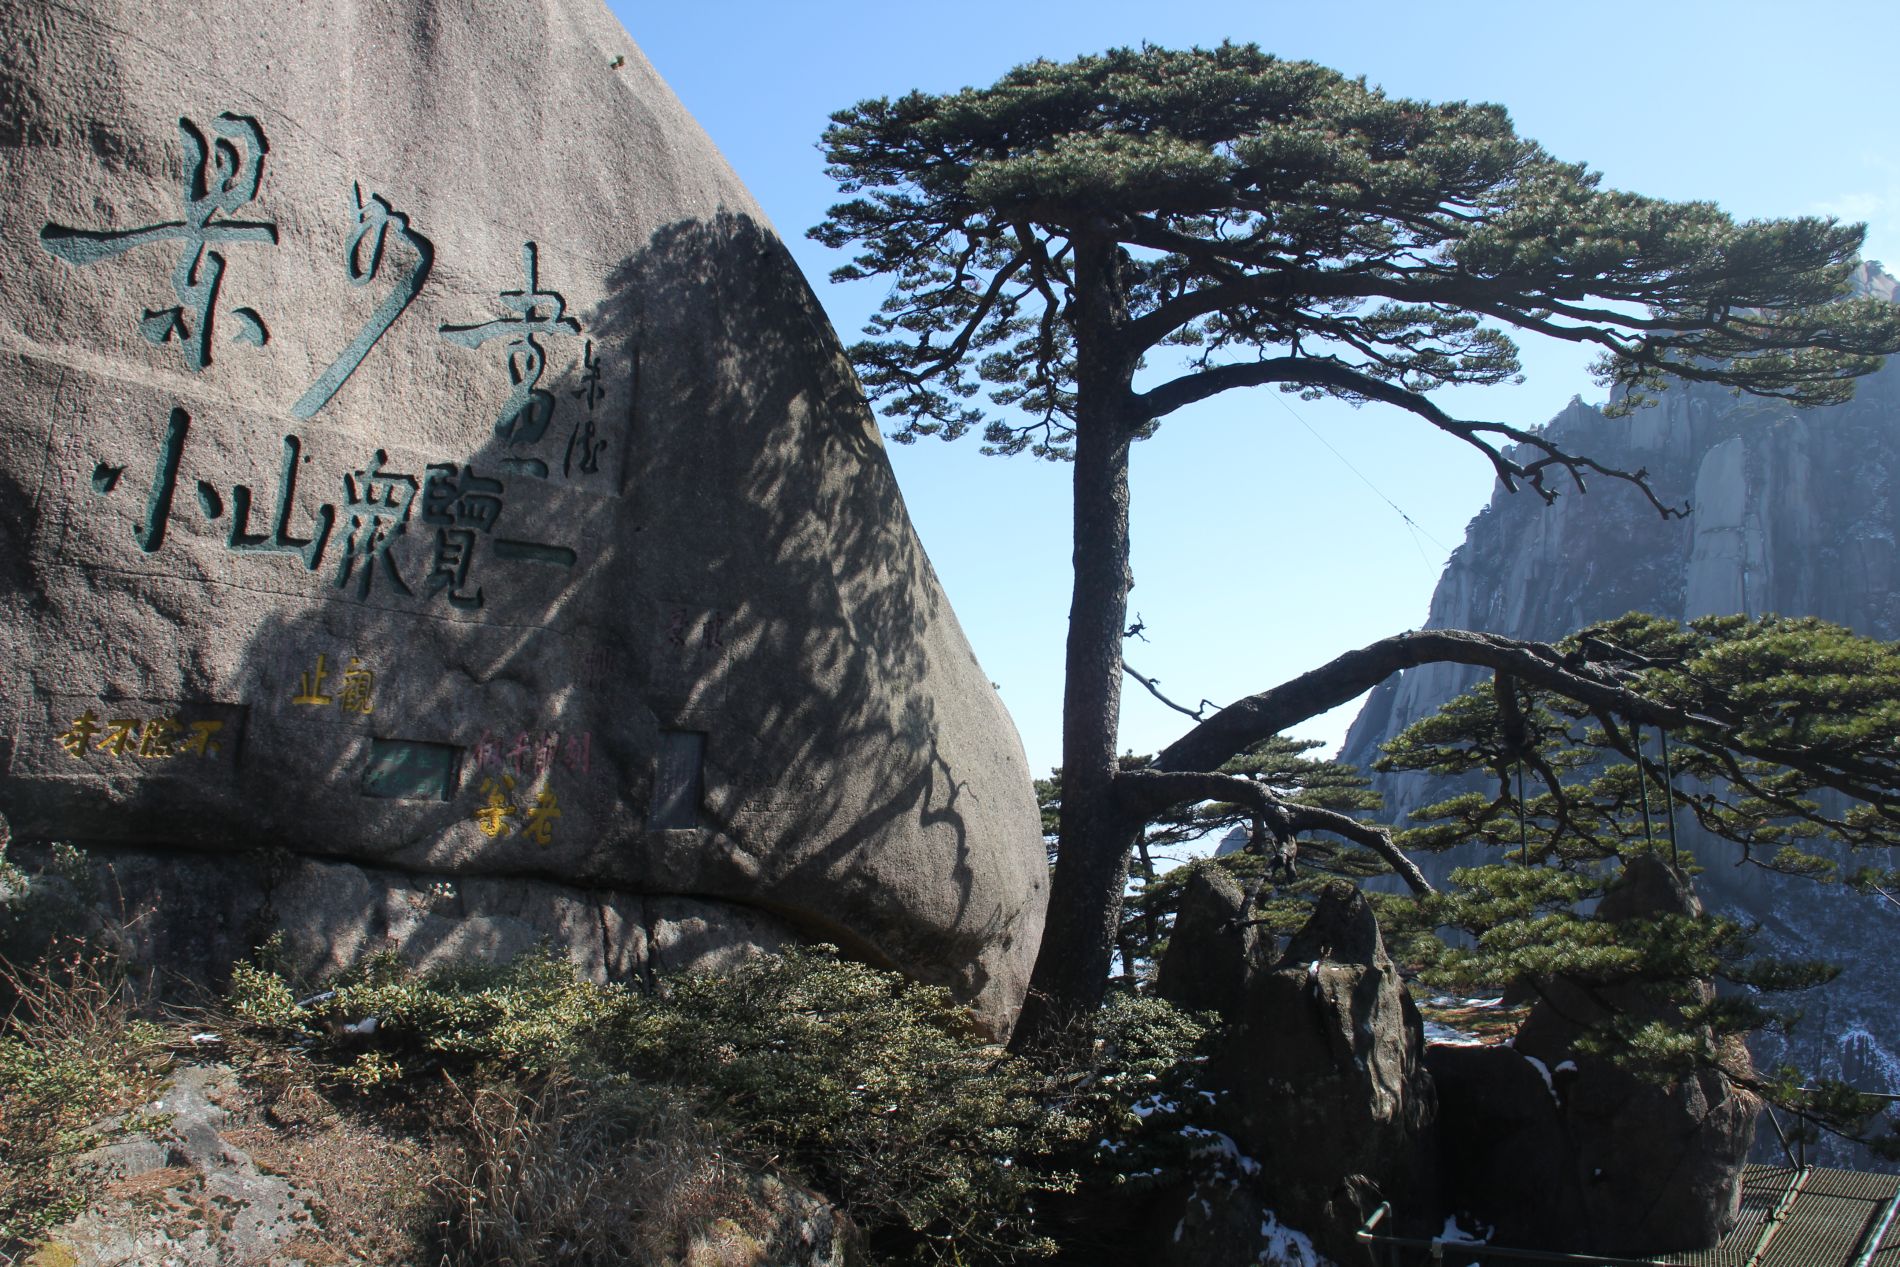 The "Greeting Pine" welcomes tourists who arrive on Huangshan by cable car.